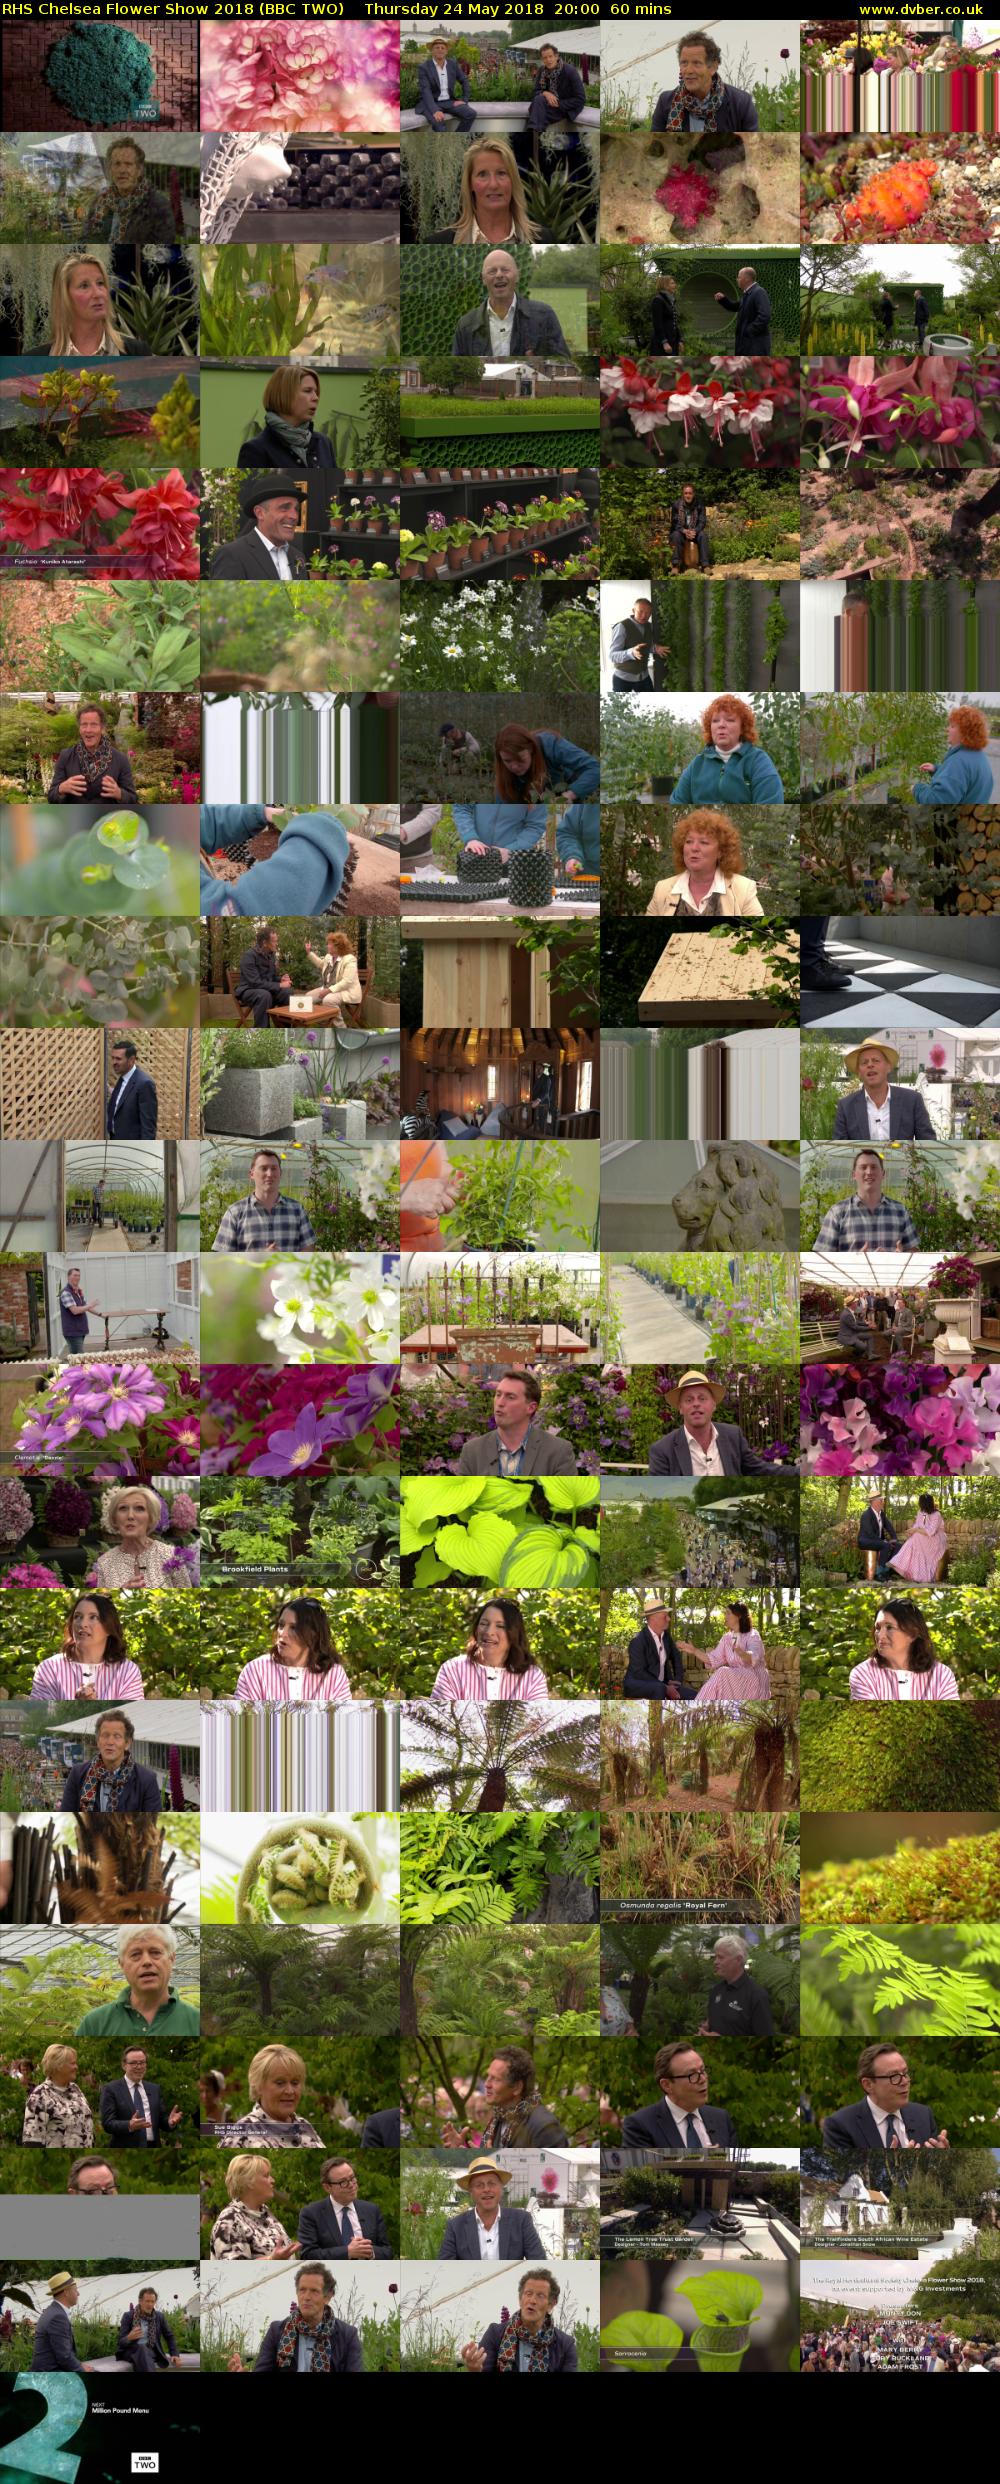 RHS Chelsea Flower Show 2018 (BBC TWO) Thursday 24 May 2018 20:00 - 21:00